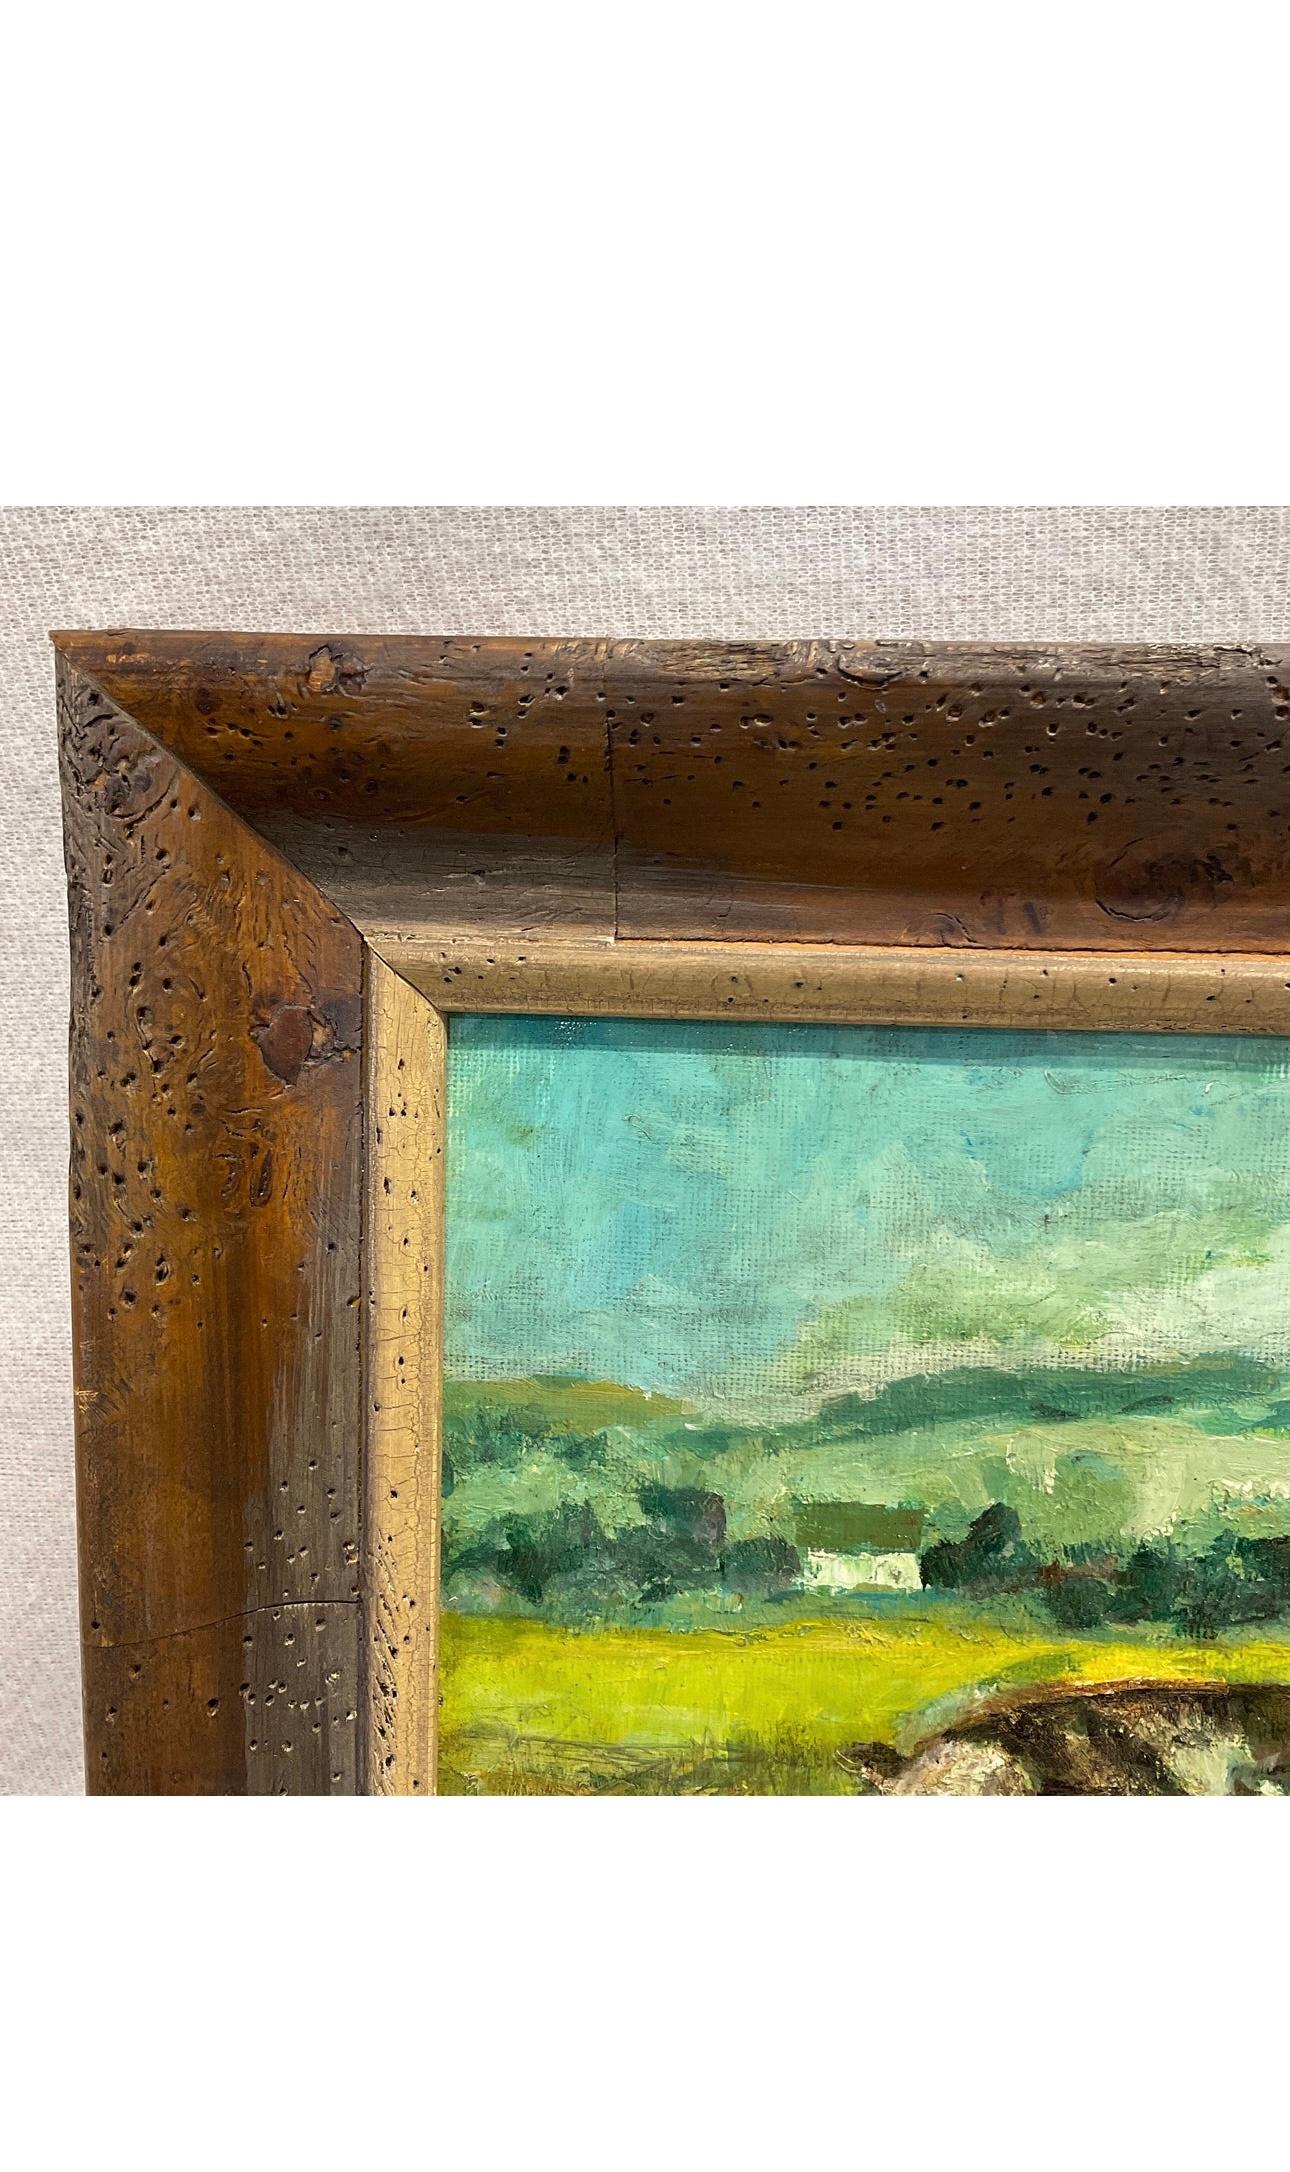 This antique oil pastoral scene has lovely colors! The horizon displays multiple hues of blue in the rolling hills and clouds, and the field has a mixture of green and earthly tones, surrounding the three cows. This piece has nice texture that is